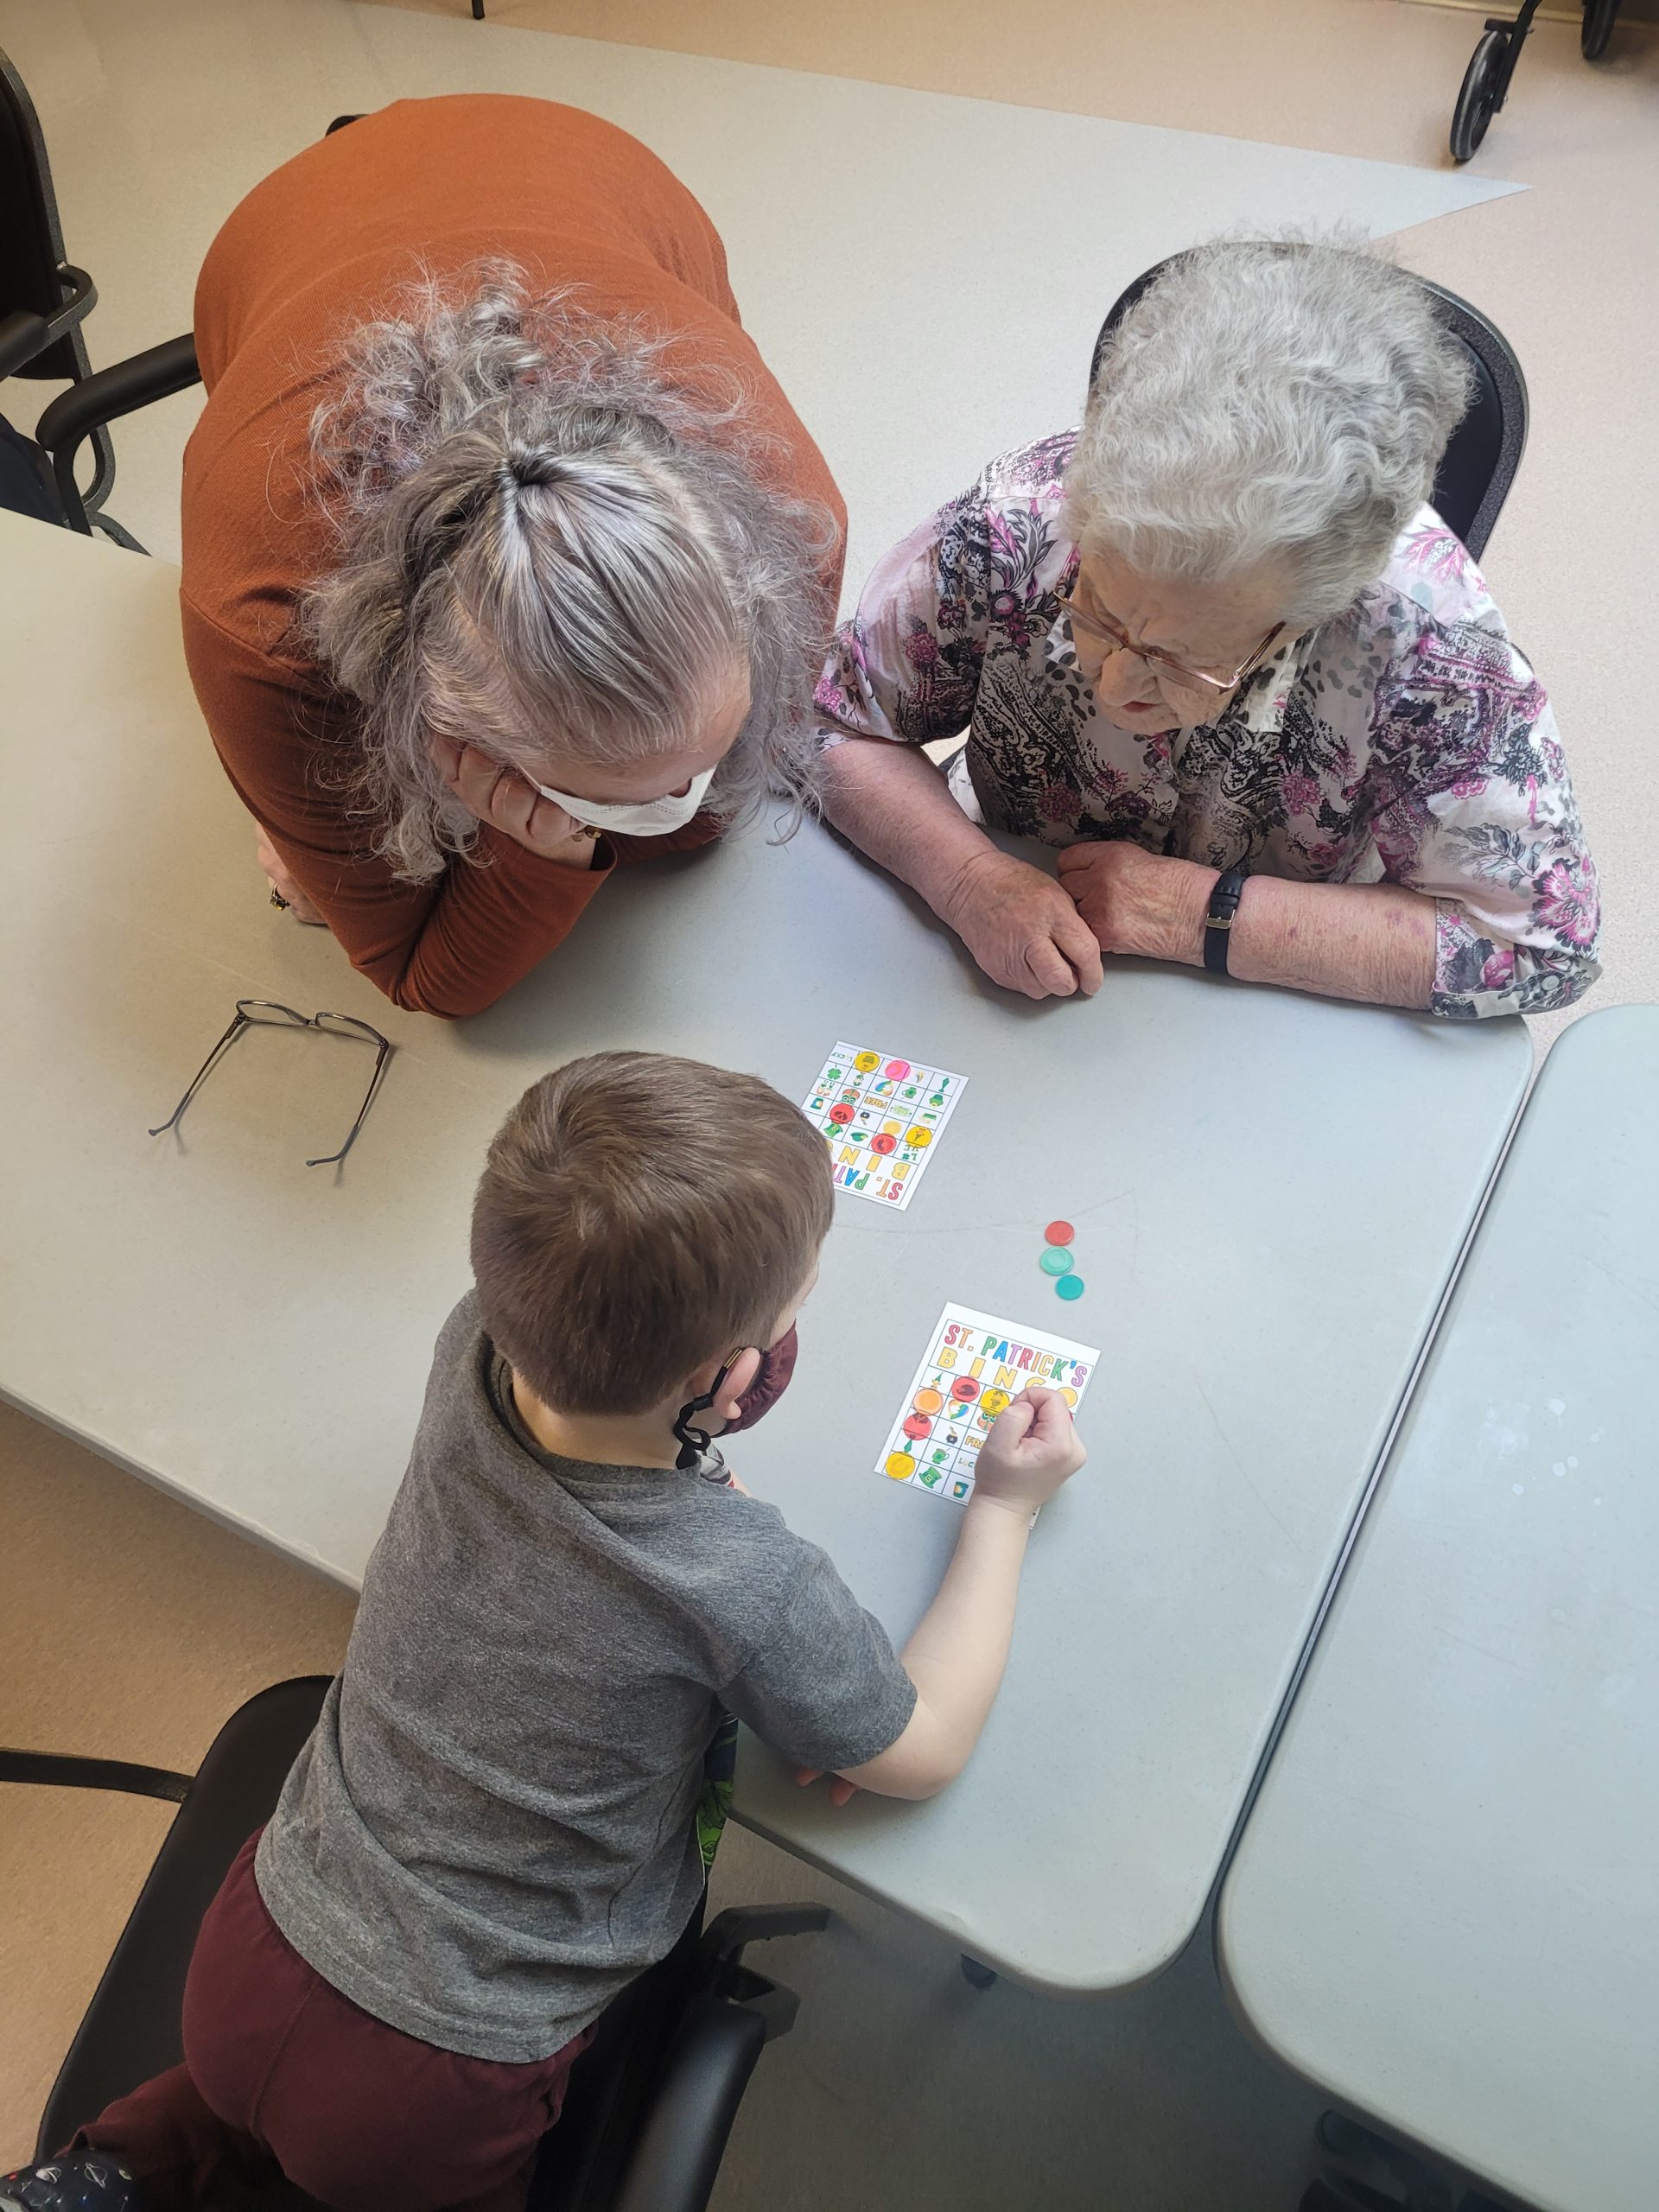 Barkers Point Elementary School students played Bingo, made bracelets, and sang songs to residents at Fredericton's York Care Centre (YCC) nursing home during two March visits.